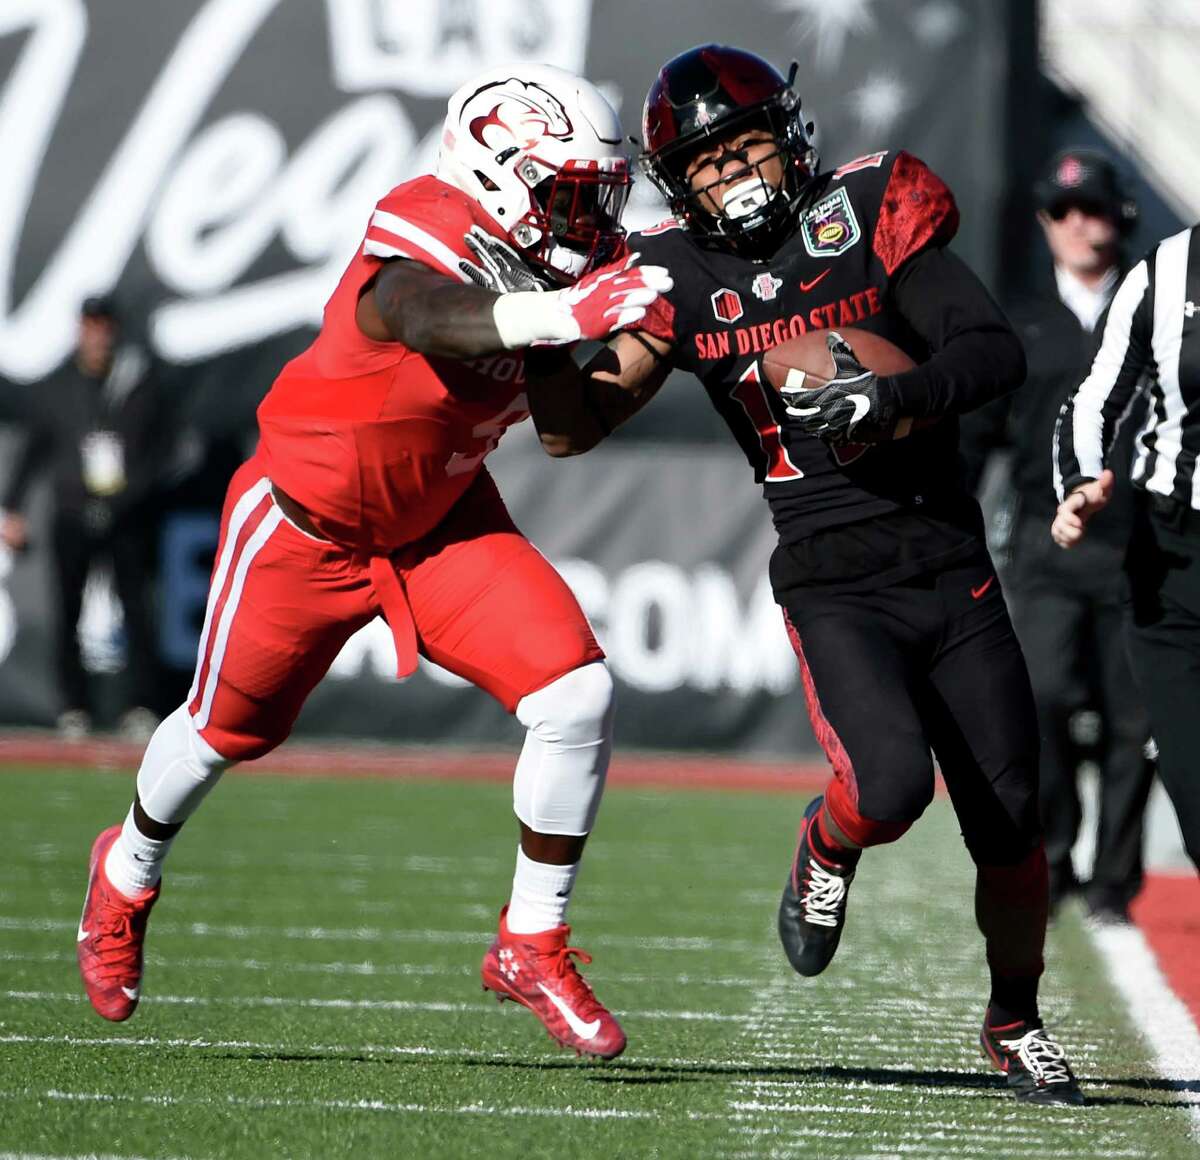 San Diego State's Donnel Pumphrey runs past UH's Matthew Adams on his way to setting the NCAA rushing mark Saturday.